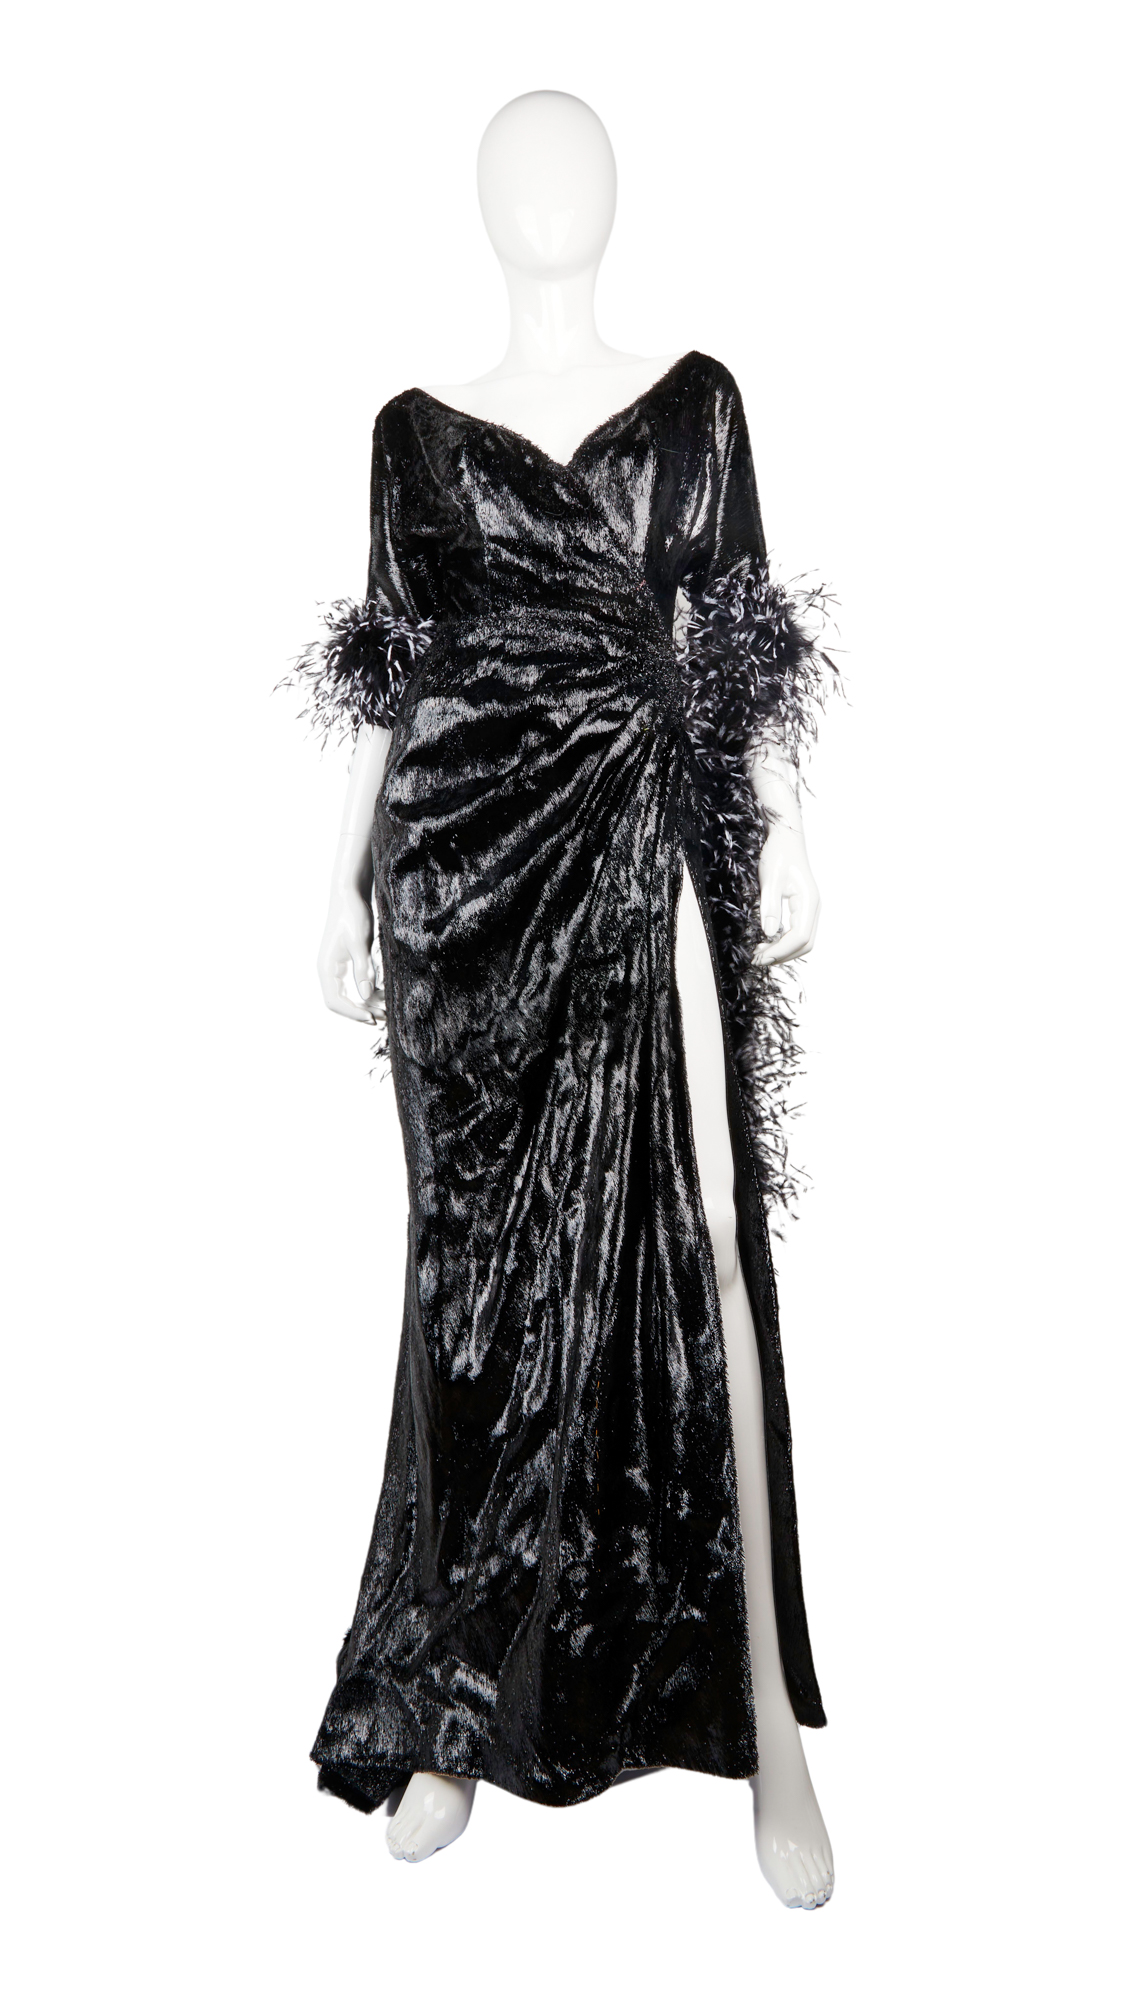 Marilyn Monroe’s Mae West-inspired black evening gown, which she wore while filming “The Seven Year Itch”